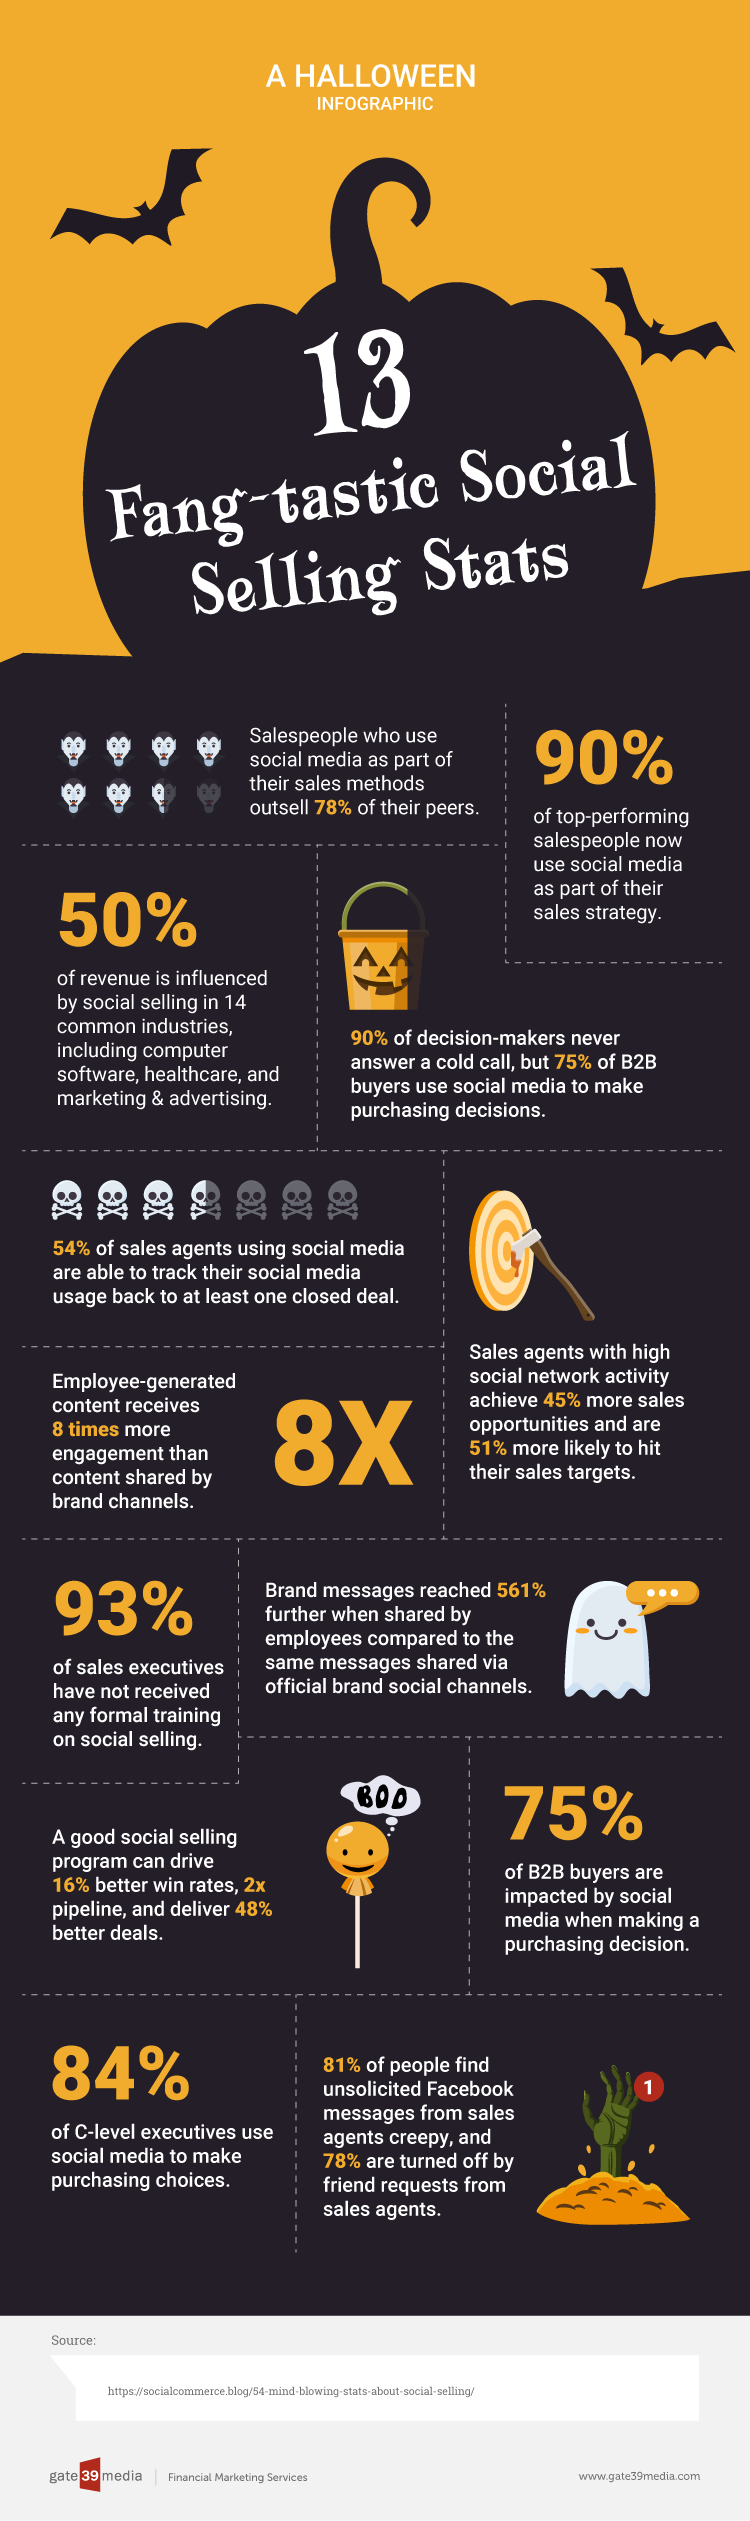 Halloween Infographic on Social Selling Stats